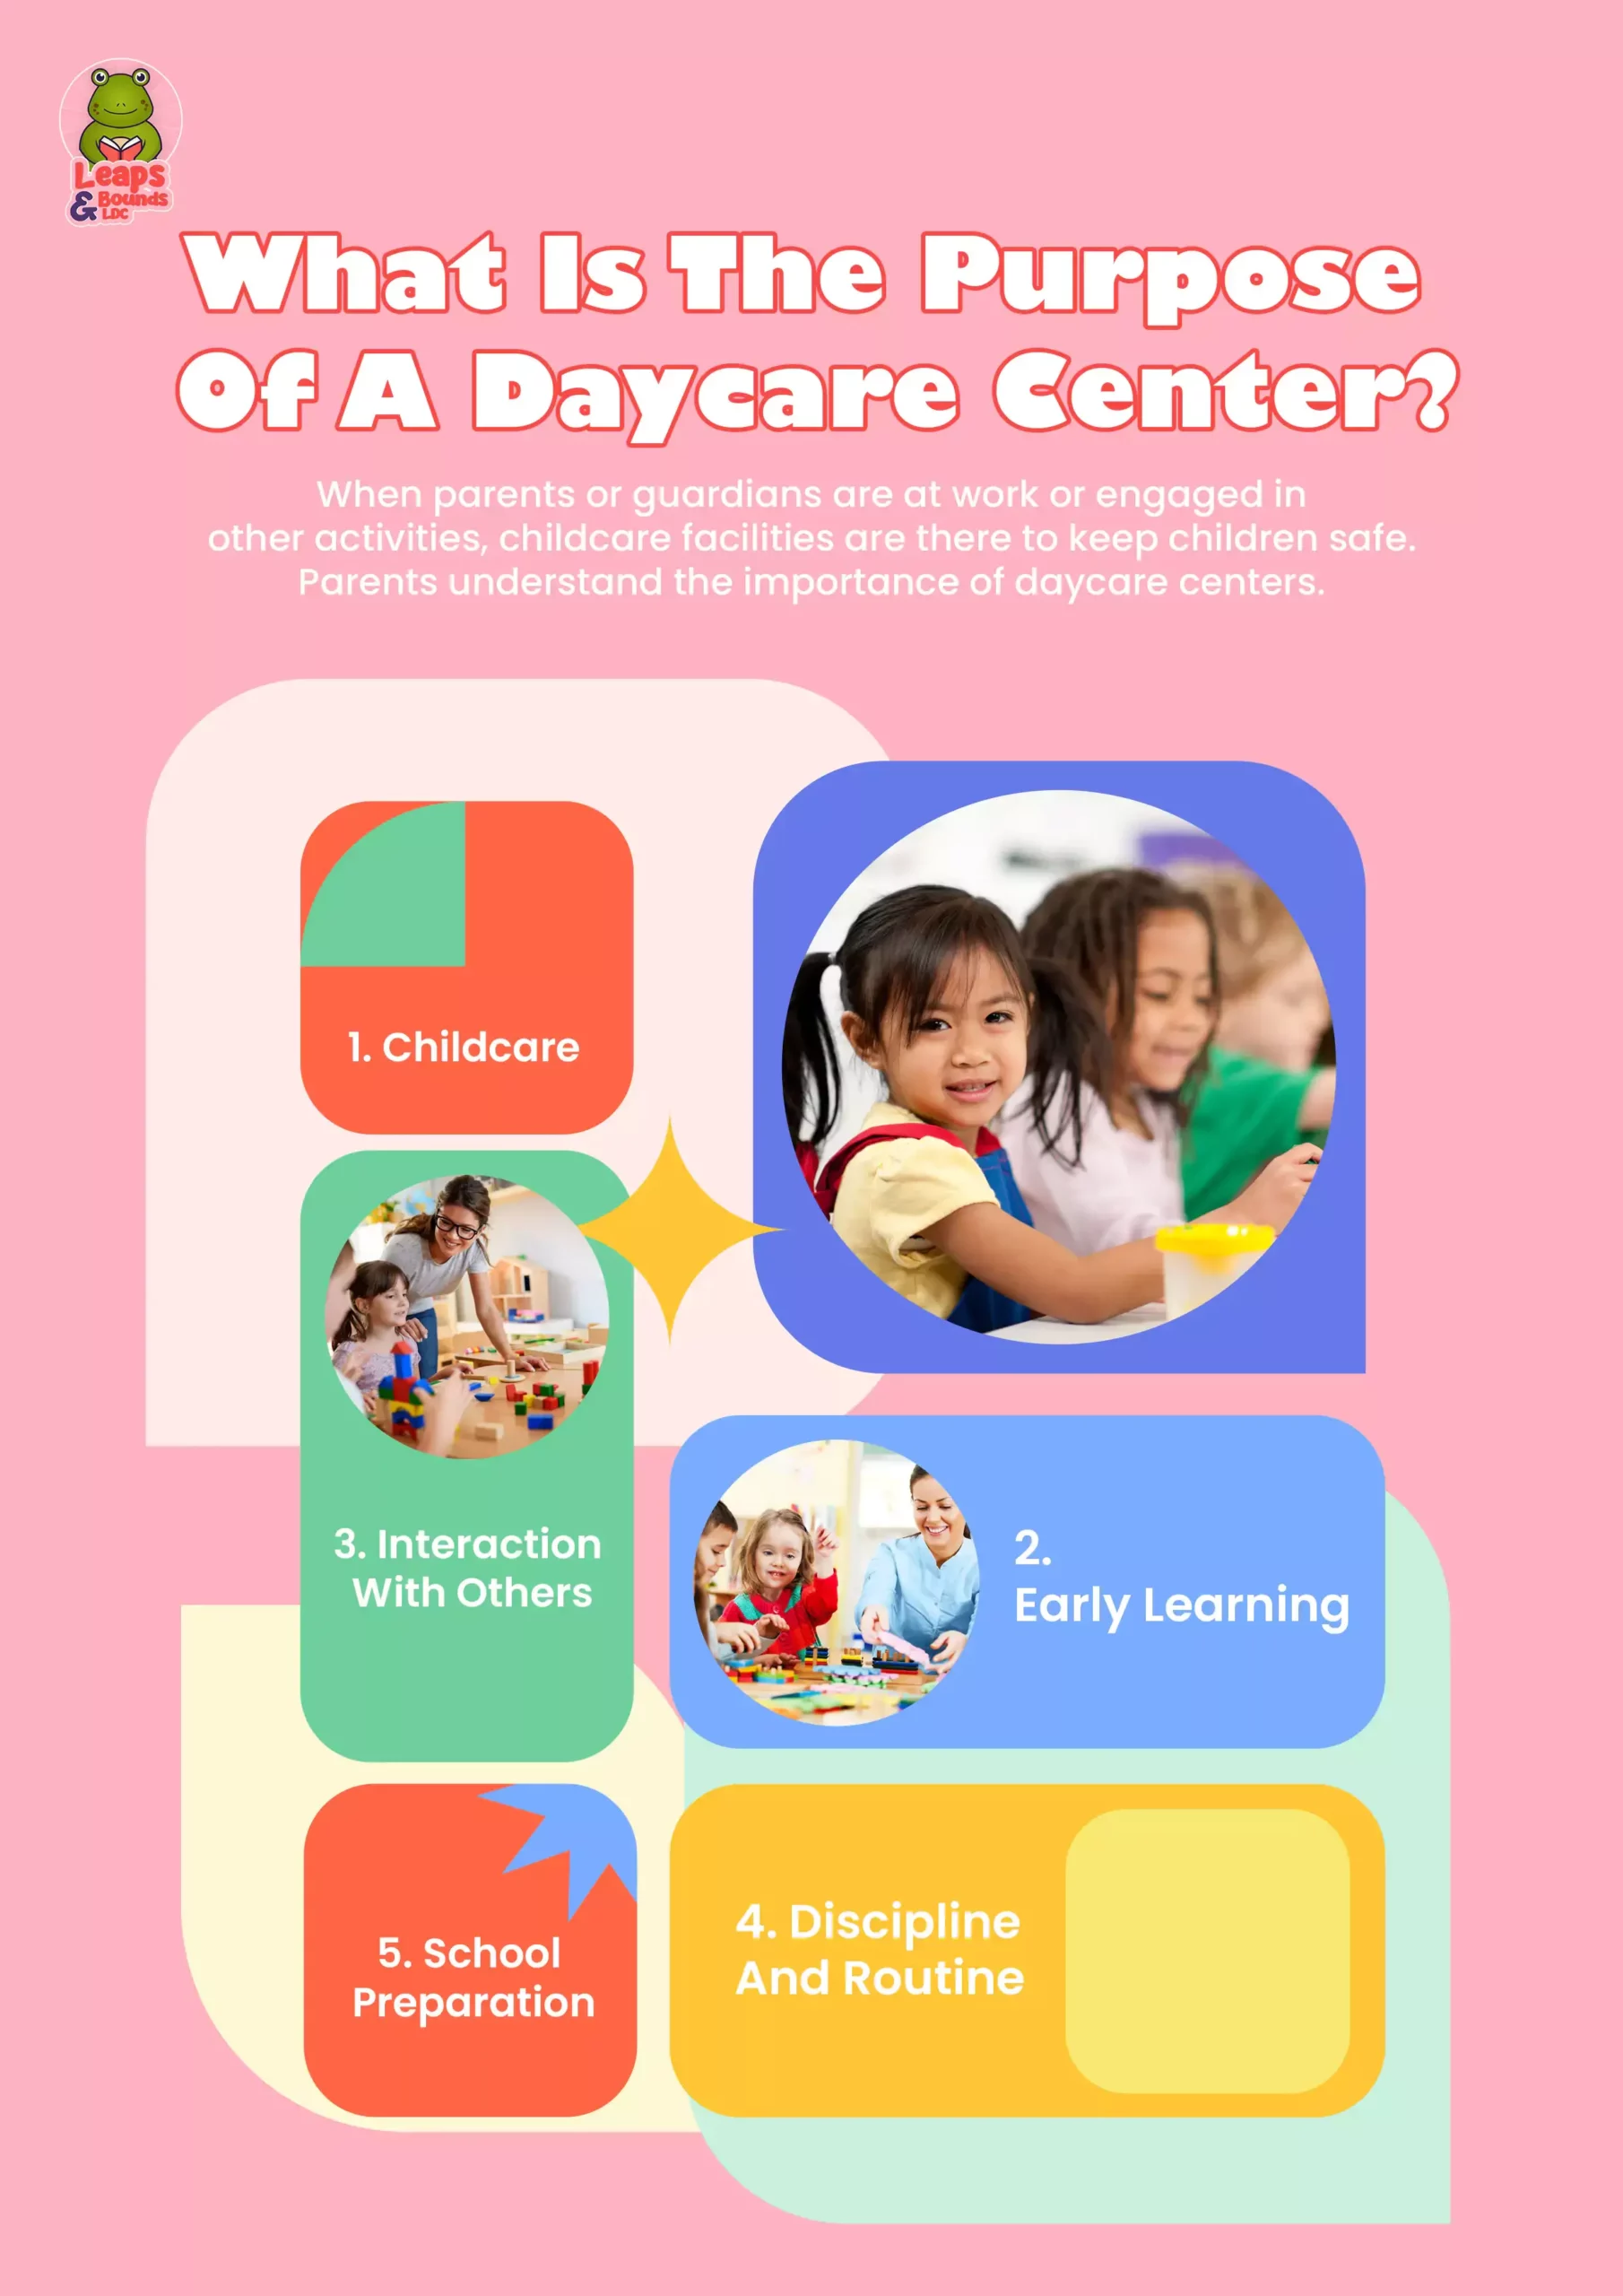 What Is The Purpose Of A Daycare Center?